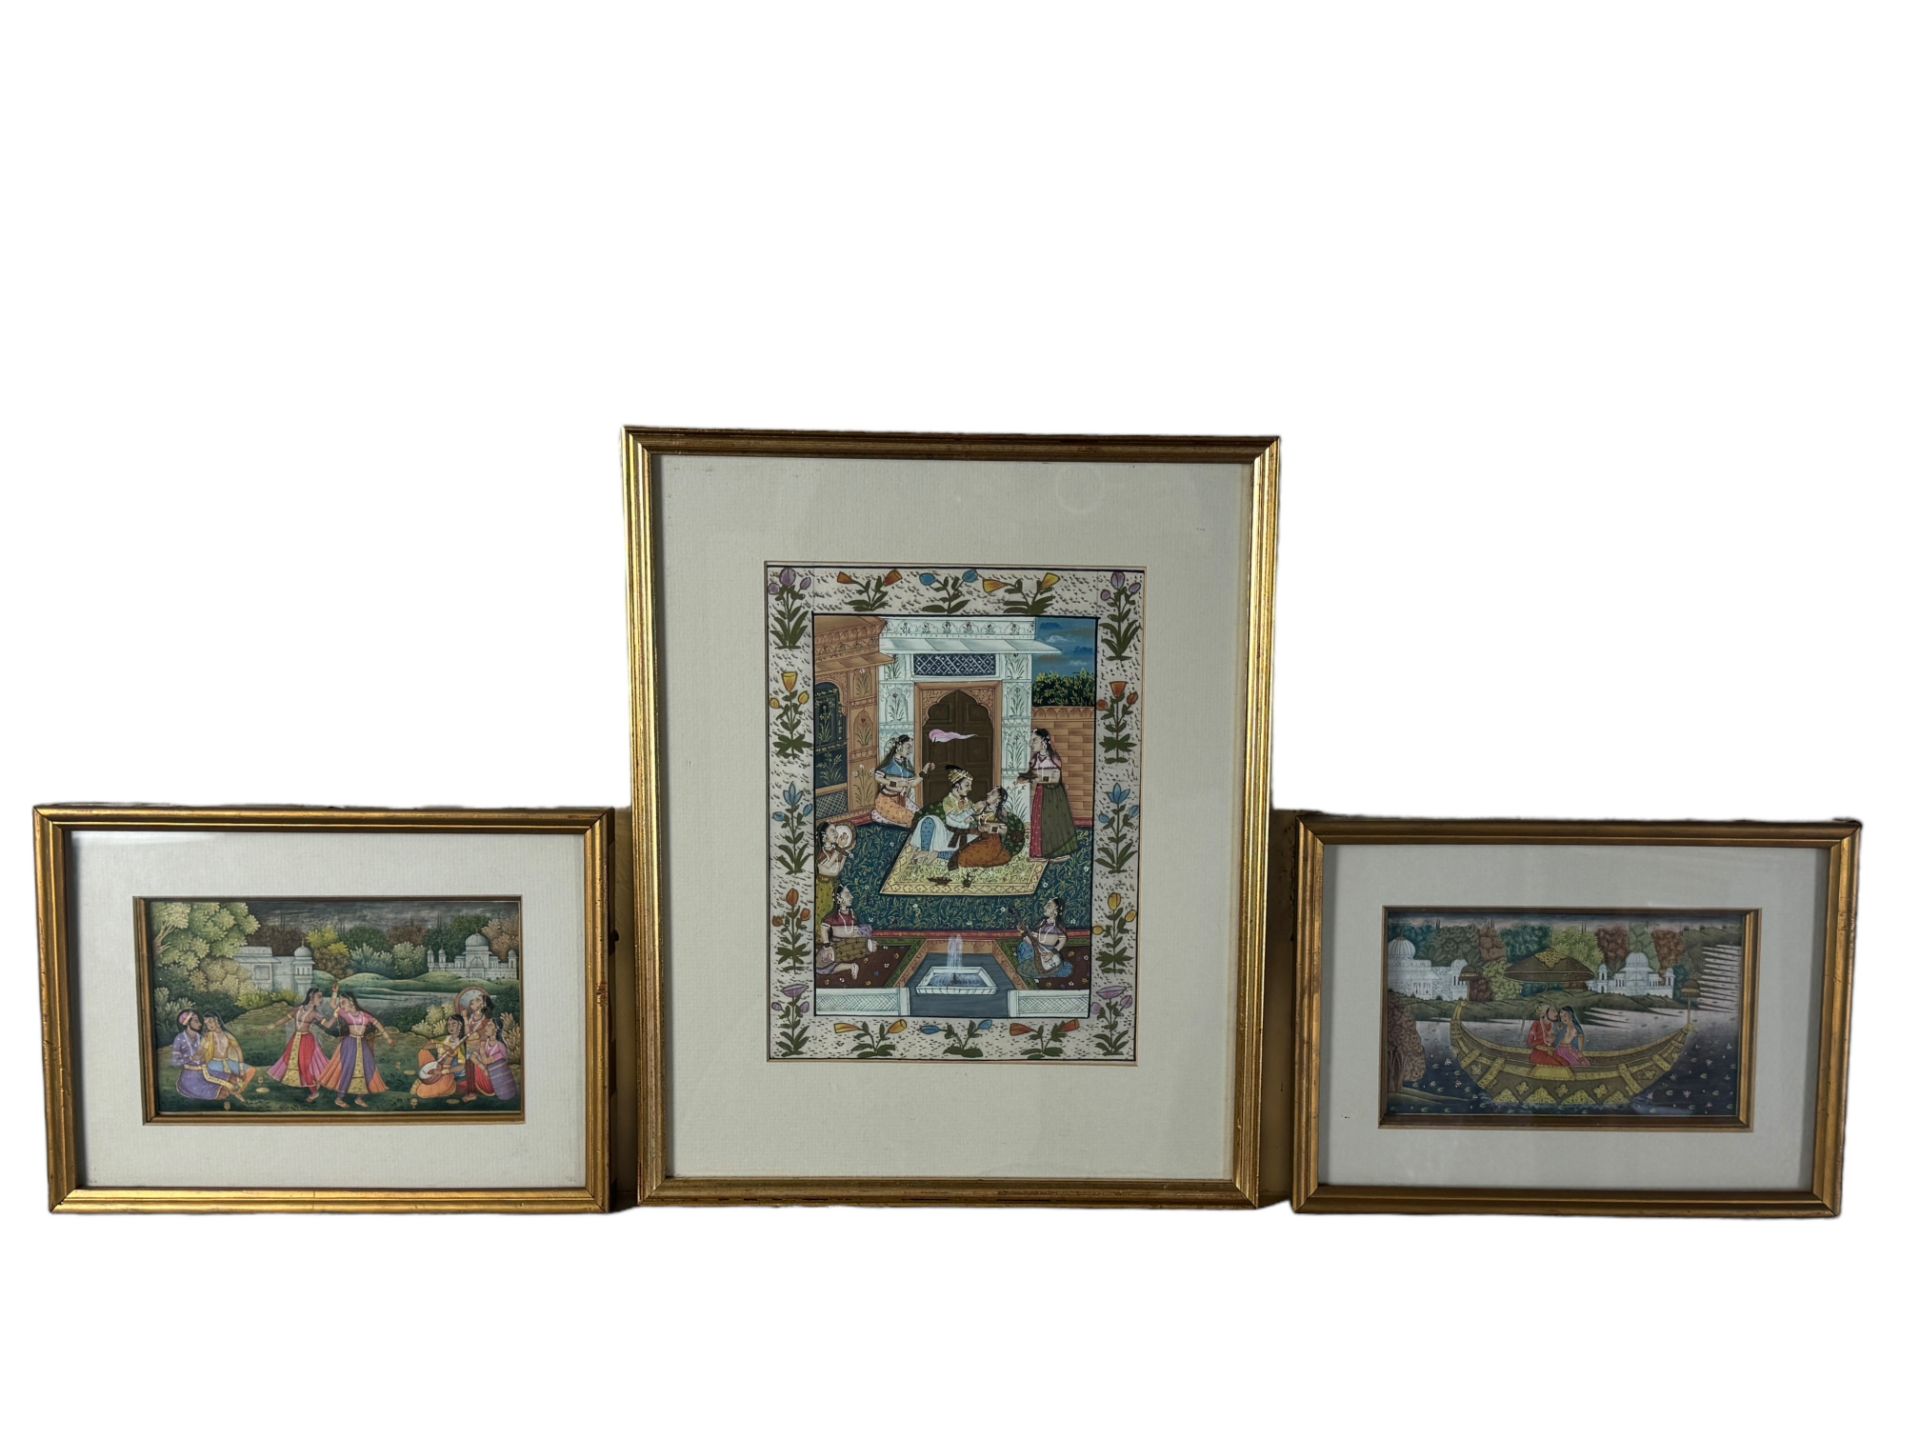 A group of three Islamic watercolours